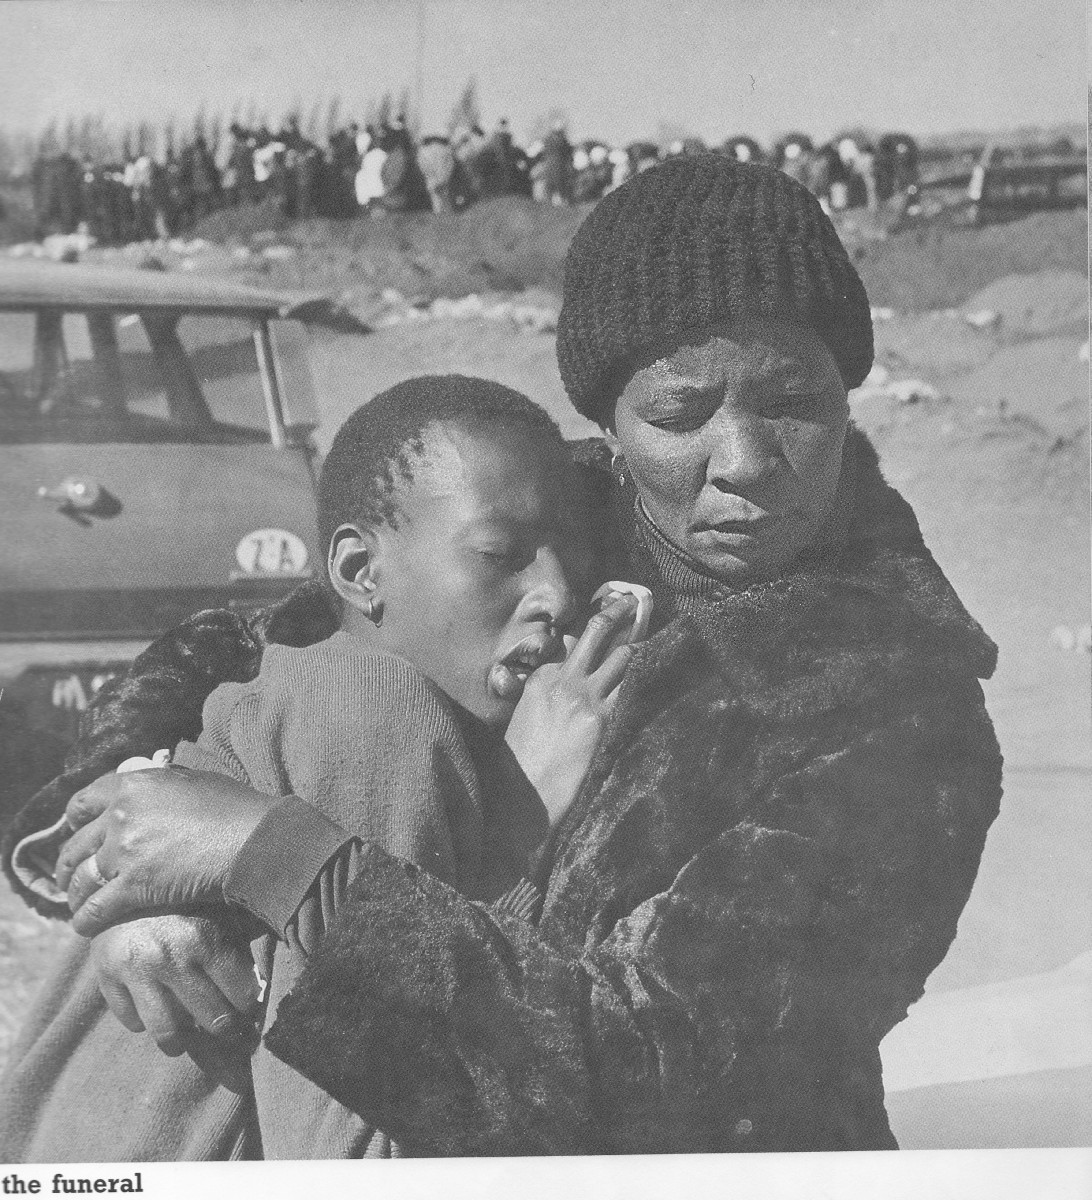 Seeing, hearing, and encountering post-apartheid South Africa